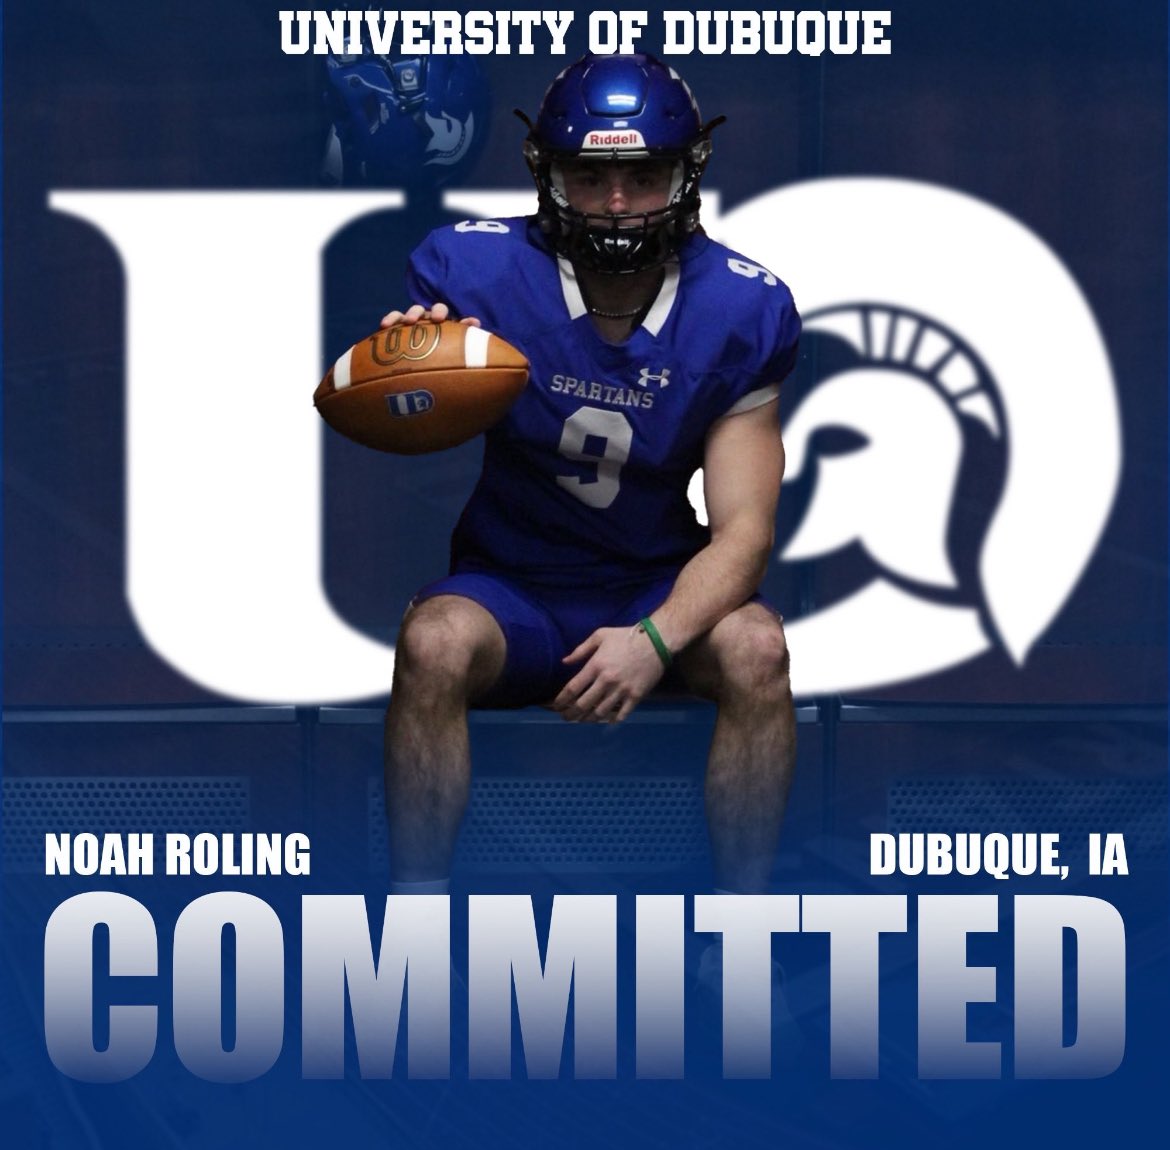 I'm beyond excited to announce my commitment to the University of Dubuque! I want to thank @coachmaiuri and the other Coaches for providing this opportunity to me, as well as Family, Coaches, Teammates, and anyone who has supported me throughout! Excited to be a Spartan!💙🤍